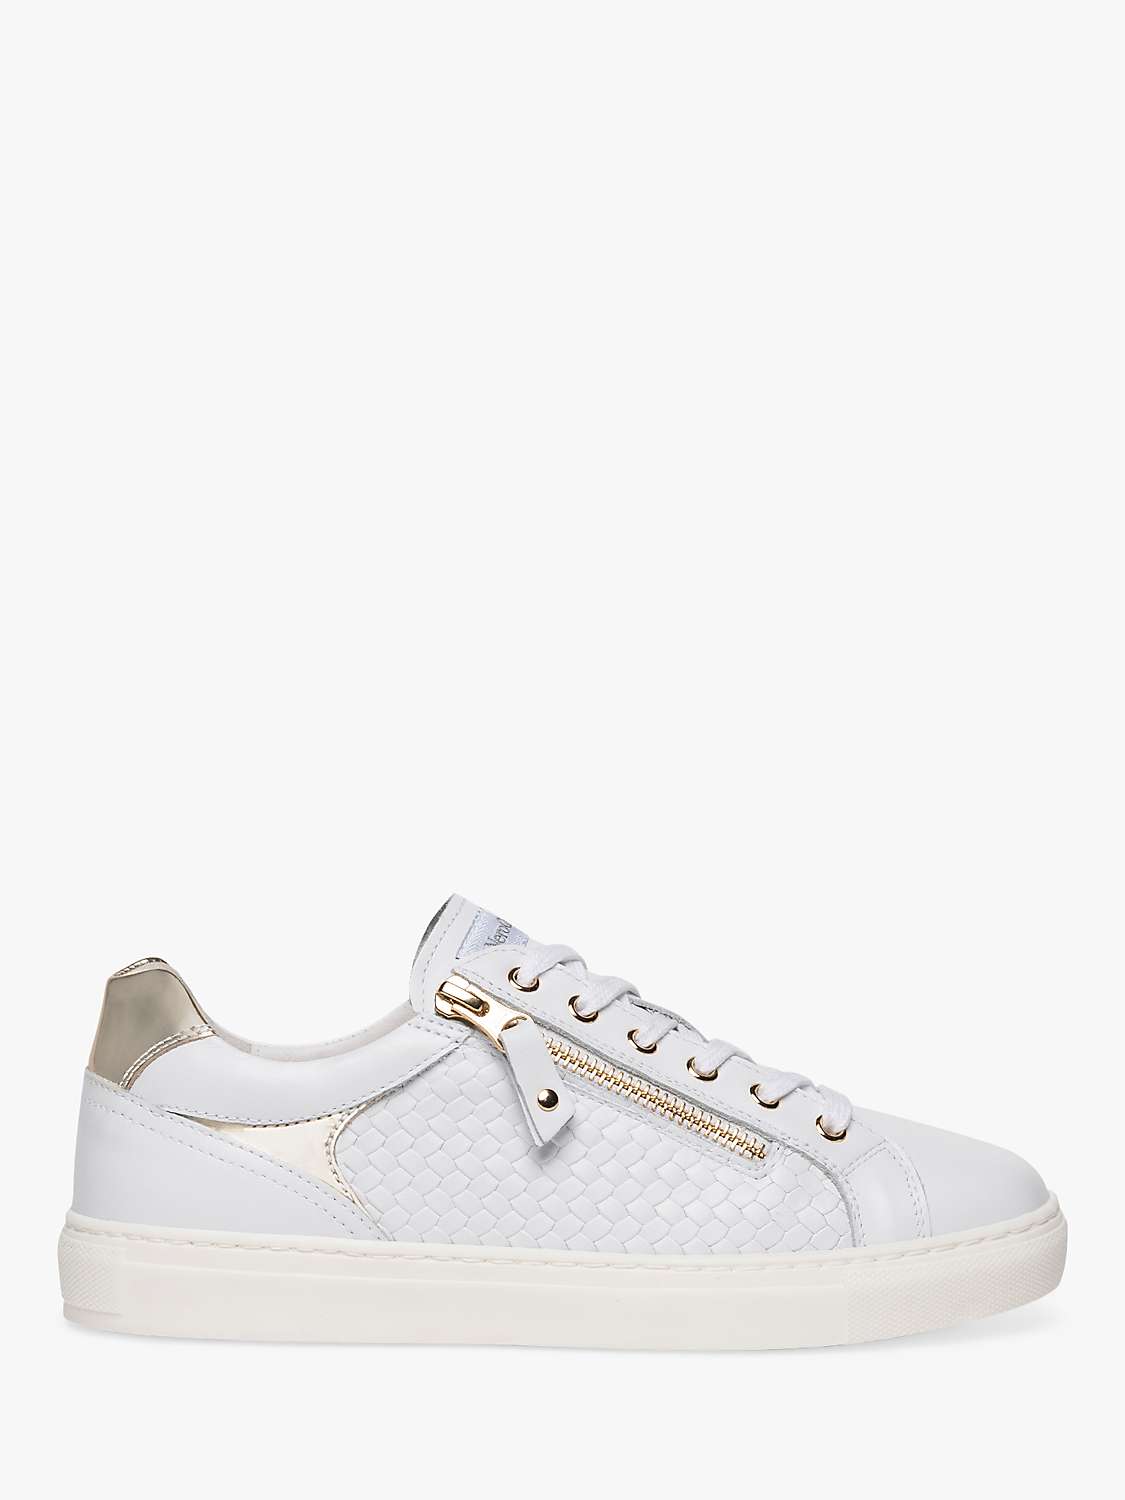 Buy NeroGiardini Leather Zip Detail Trainers, White Online at johnlewis.com